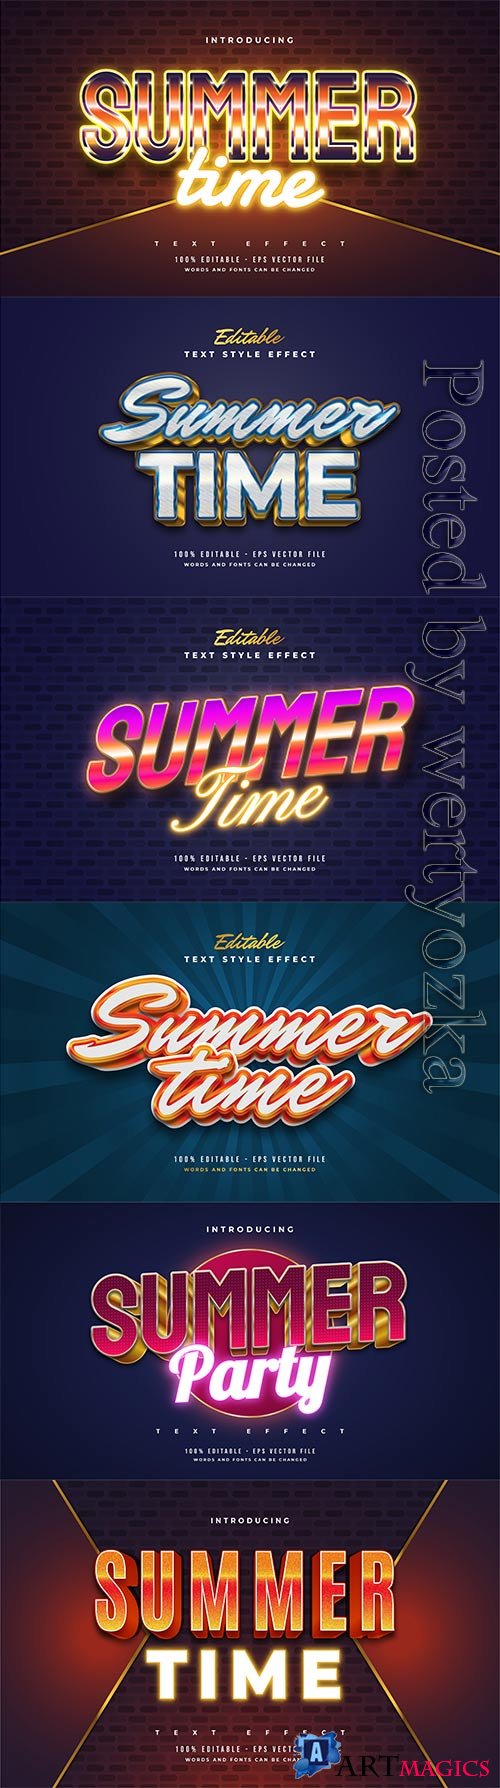 Summer time text with cartoon style editable vector text effect